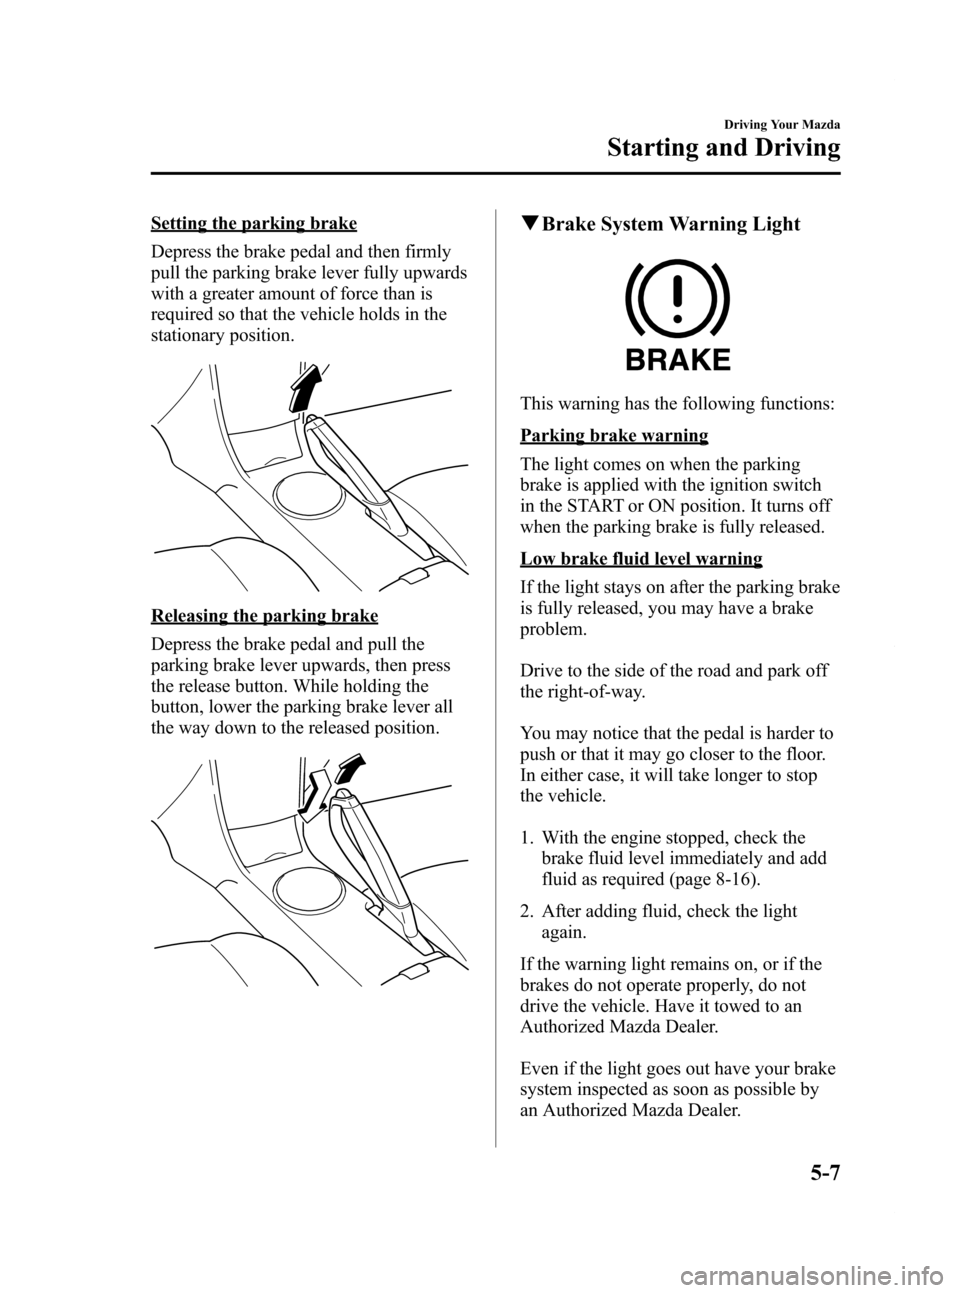 MAZDA MODEL RX 8 2009  Owners Manual (in English) Black plate (145,1)
Setting the parking brake
Depress the brake pedal and then firmly
pull the parking brake lever fully upwards
with a greater amount of force than is
required so that the vehicle hol